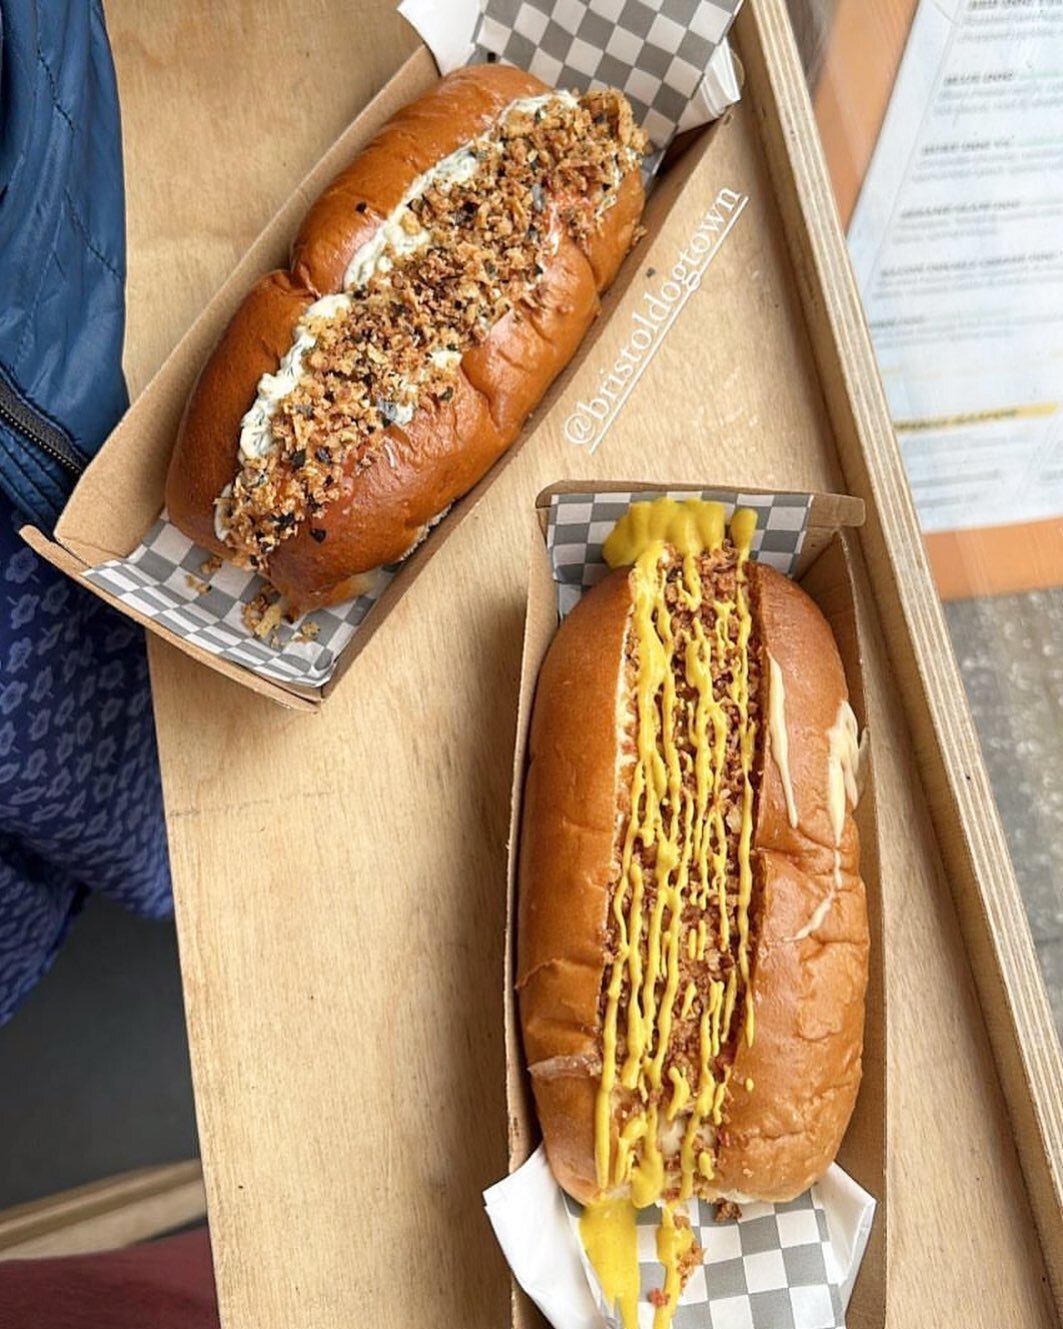 A great snap of the Blue dog &amp; Bacon double cheese dog from @lharrison95 a couple weeks ago @wappingwharf 

#hotdog #wappingwharf #bristolfoodie #bristolfood #bristolfoodanddrink #ukfastfood #dogsofinstagram